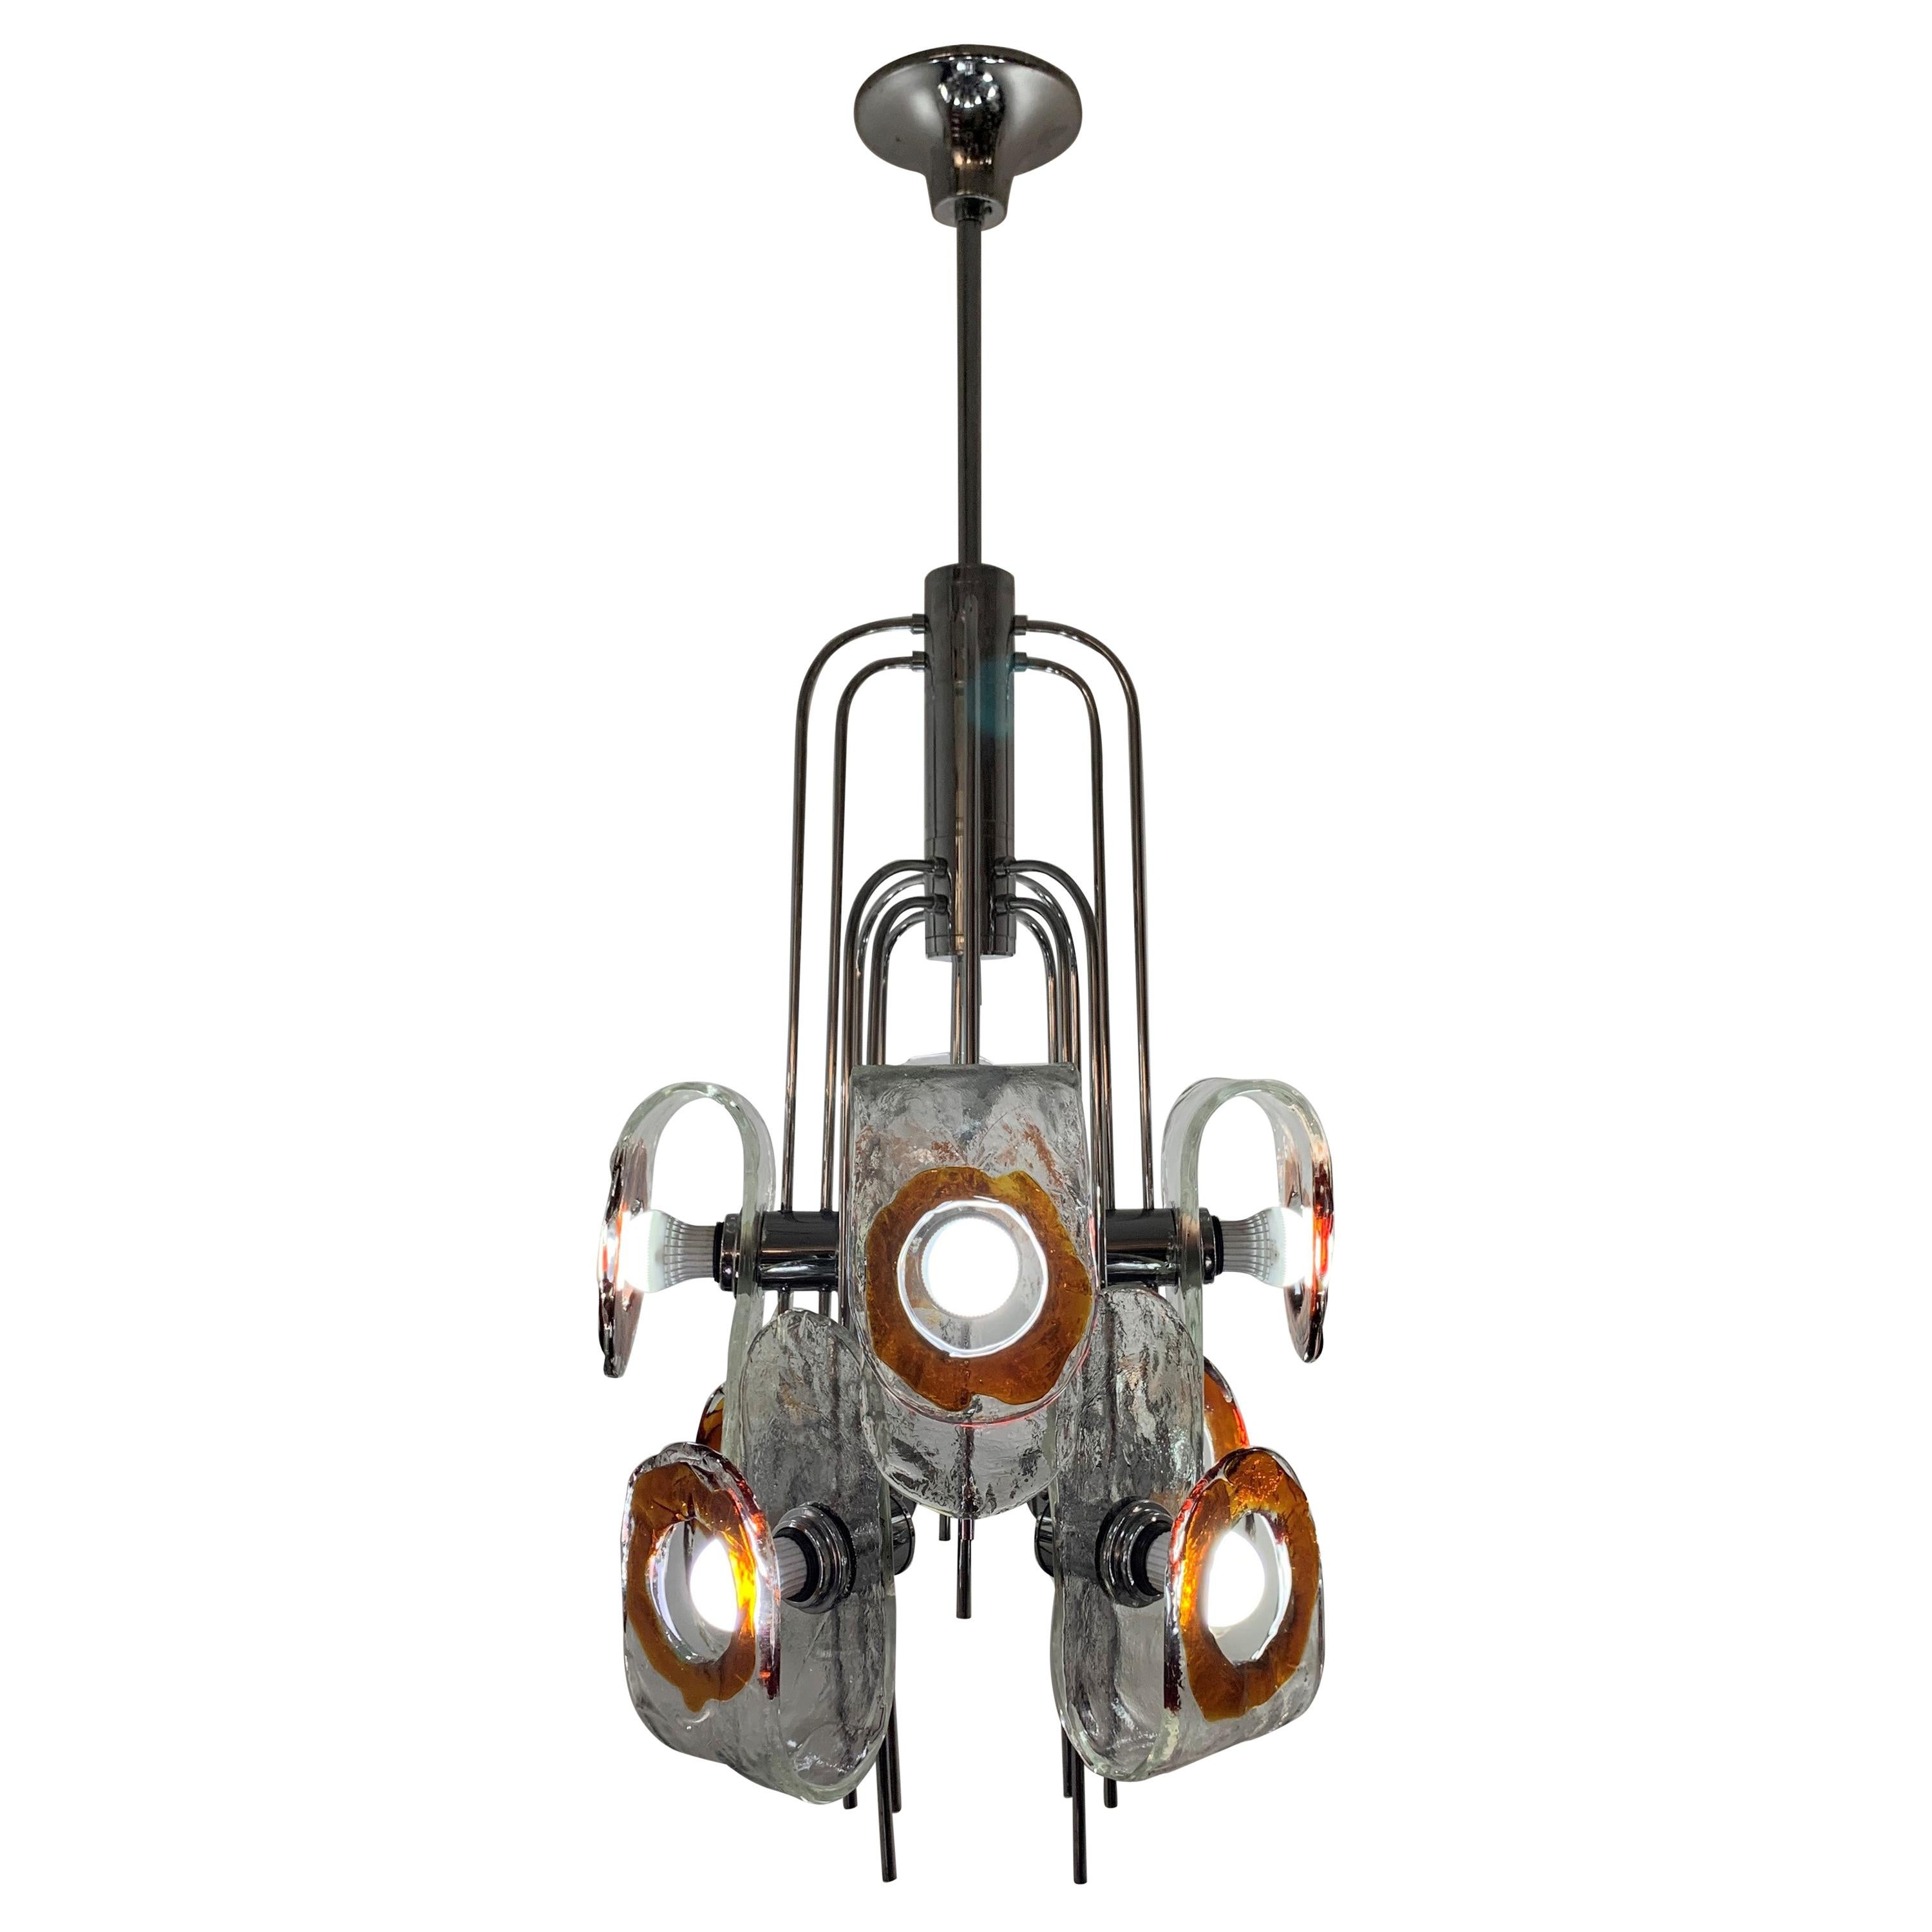 Large Mid-Century Modern Chandelier by Mazzega, Murano Glass, Italy circa 1970